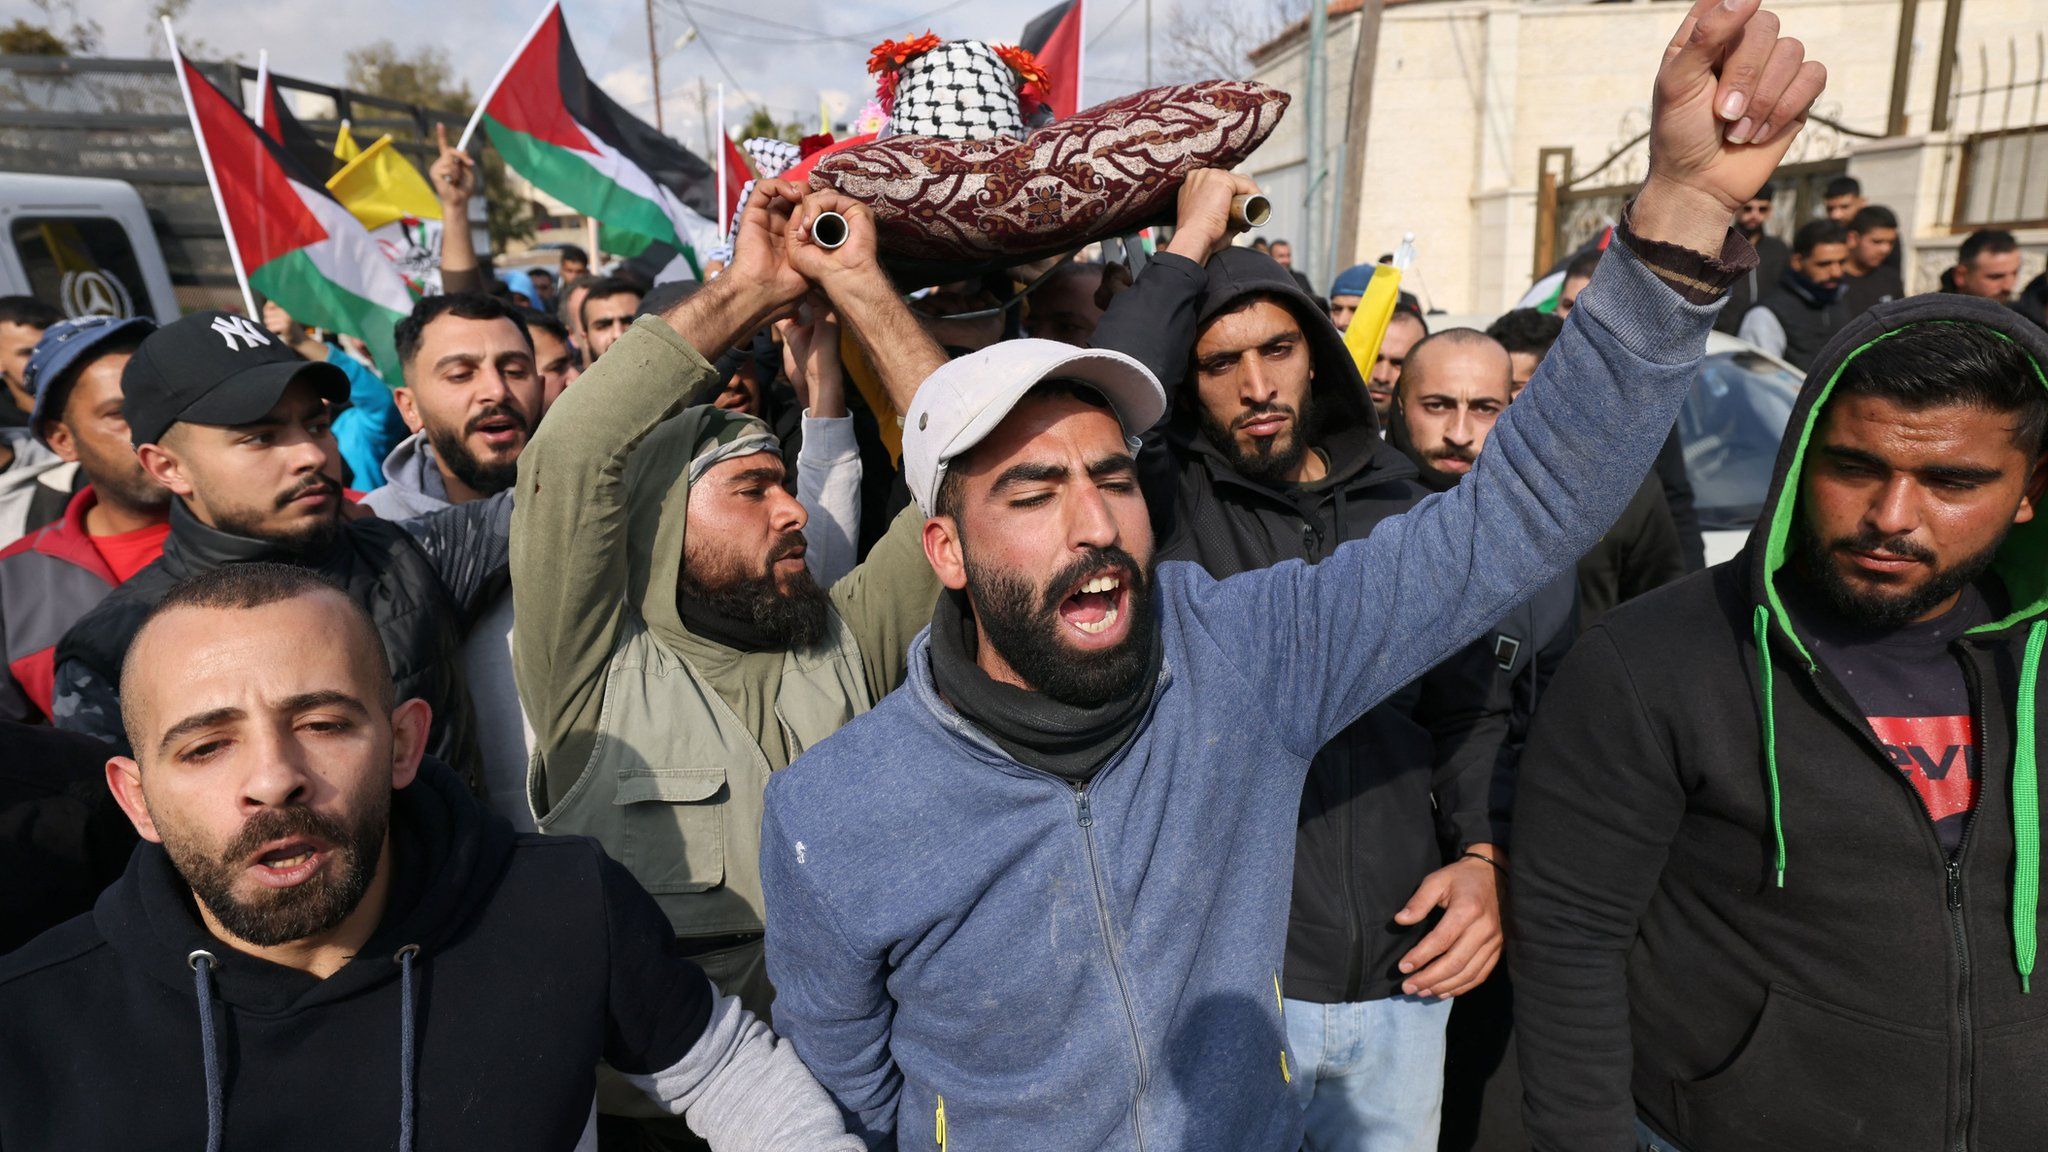 Palestinian mourners carry the body of Ahmad Kahla during his funeral in the village of Rammun, in the occupied West Bank, on 15 January 2023